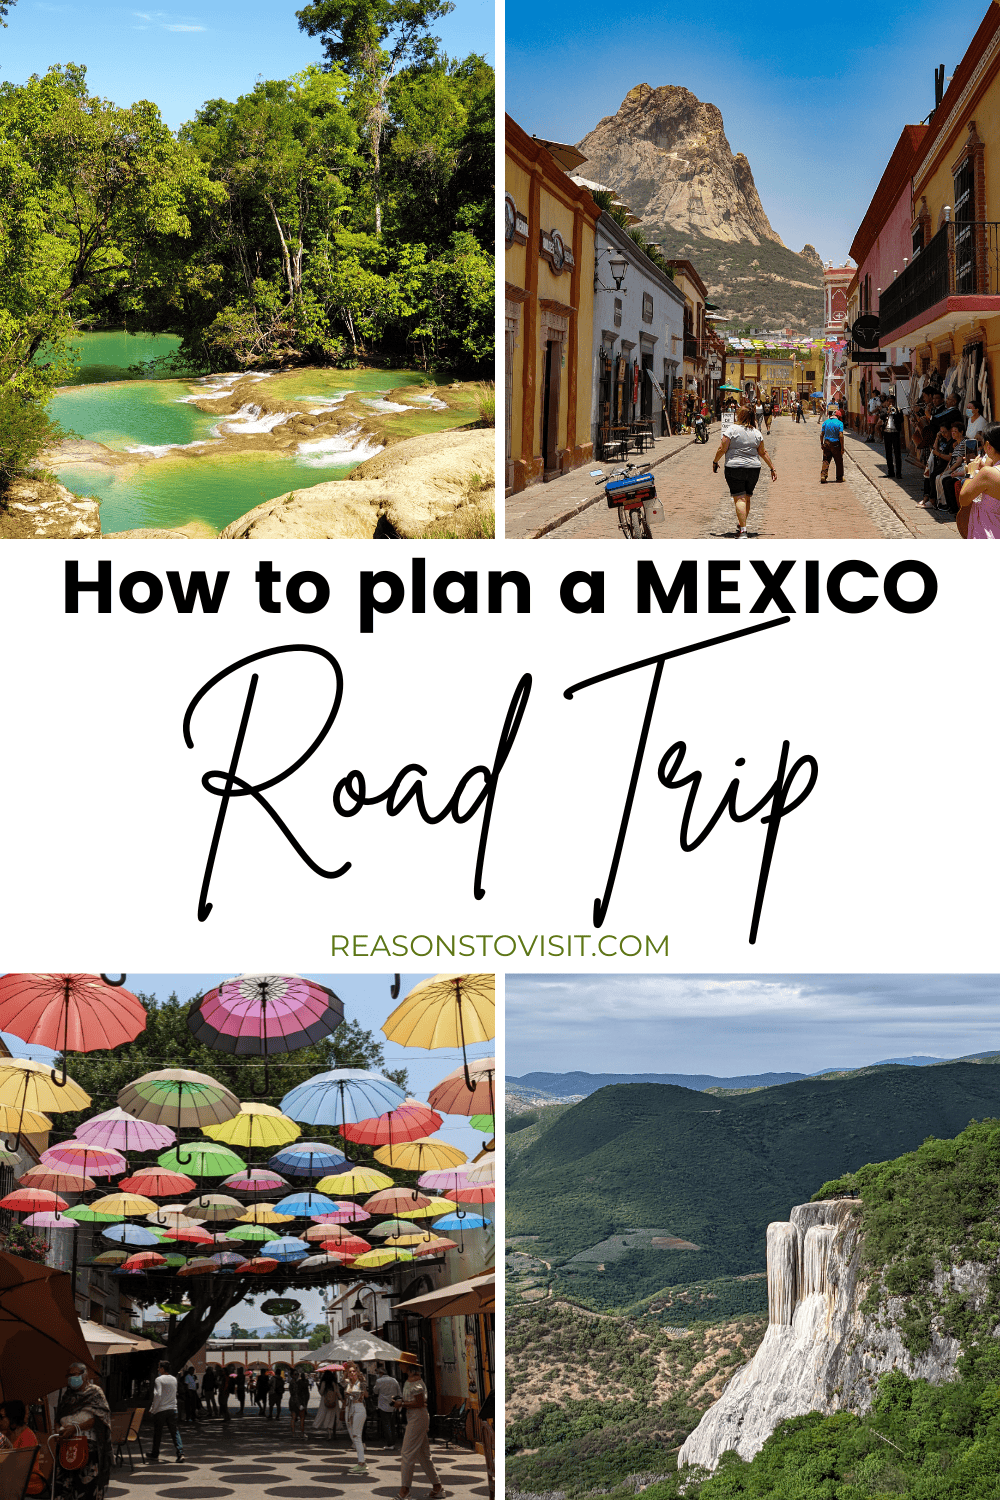 Plan your ultimate Mexico road trip with confidence! Our detailed guide covers everything you need to know about planning your journey, including route options, safety tips, and top attractions. Discover hidden gems and iconic landmarks as you meticulously plan your drive through Mexico.